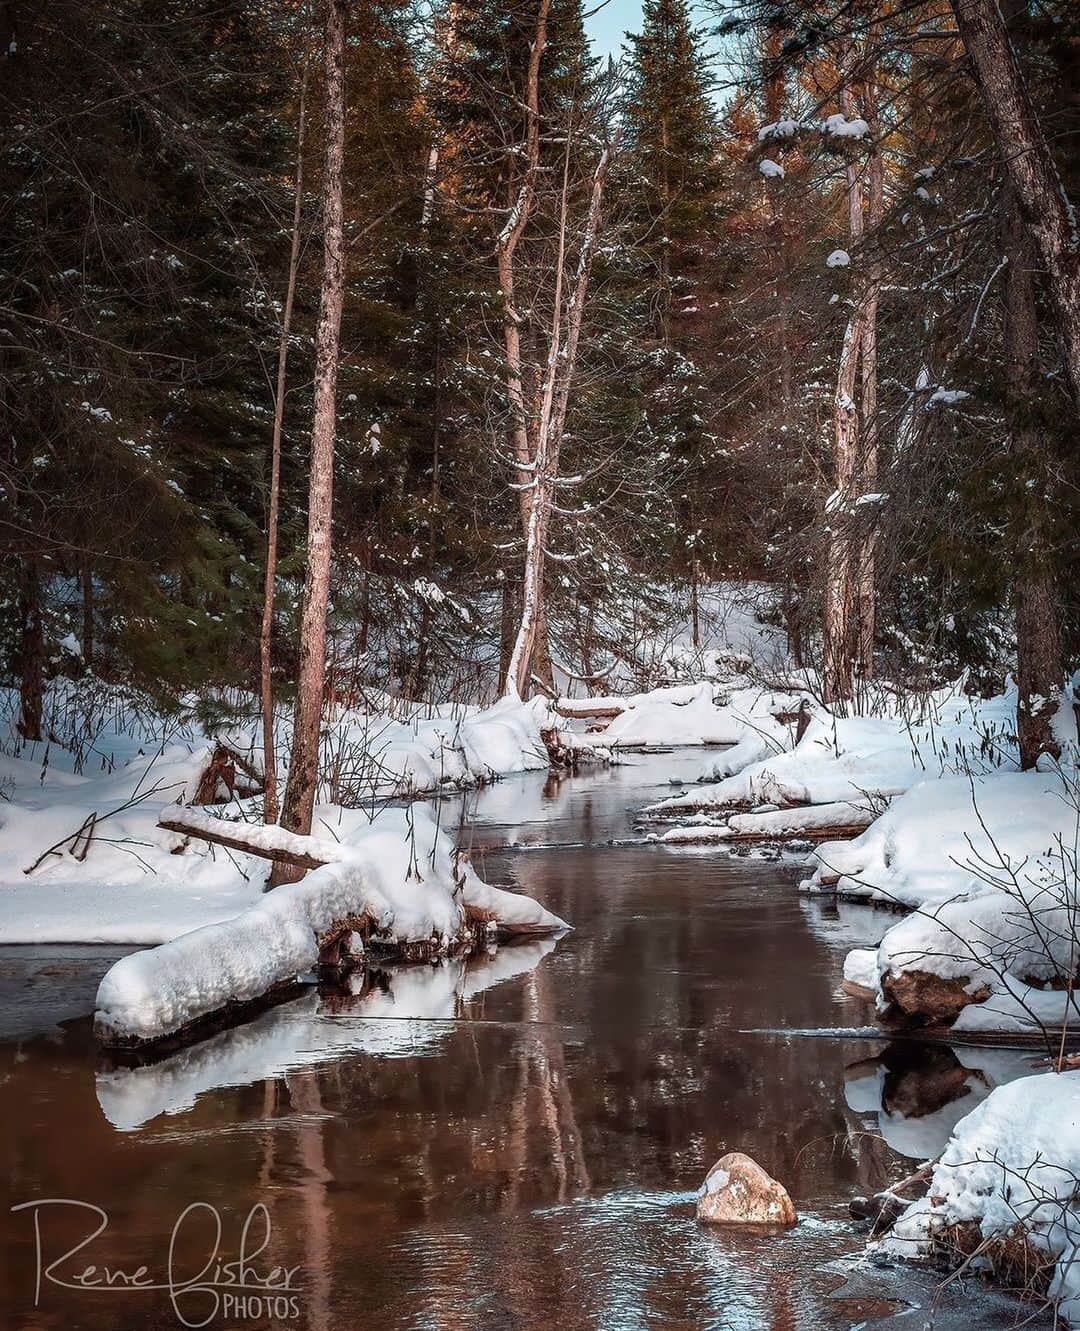 Ricoh Imagingのインスタグラム：「Posted @withregram • @renefisher_photography If you listen closely you can hear the soft crunch of wet snow and the soft trickling of the creek. ;) ⁠ ⁠ Taken with Pentax K-3 II and 40mm f/2.8 Limited lens⁠ ⁠ #Canada_PhotoLovers #discoverON #pentaxian #YourShotPhotographer #natgeoyourshot #ricohpentax #insidecanada #cangeo #sharecangeo #pentaxian #shootpentax⁠# #RicohImagingAmbassador⁠ .⁠ ⁠ .⁠ .⁠ .⁠ .⁠ ⁠ #dream_spots #visual_heaven #landscapephoto #majestic_earth #discoverglobe #natgeoyourshot #epic_captures #sharecangeo #passionateglobe #ThisWeekOnInstagram #thevisualcollective #splendid_shotz #weekly_feature #visualambassadors」